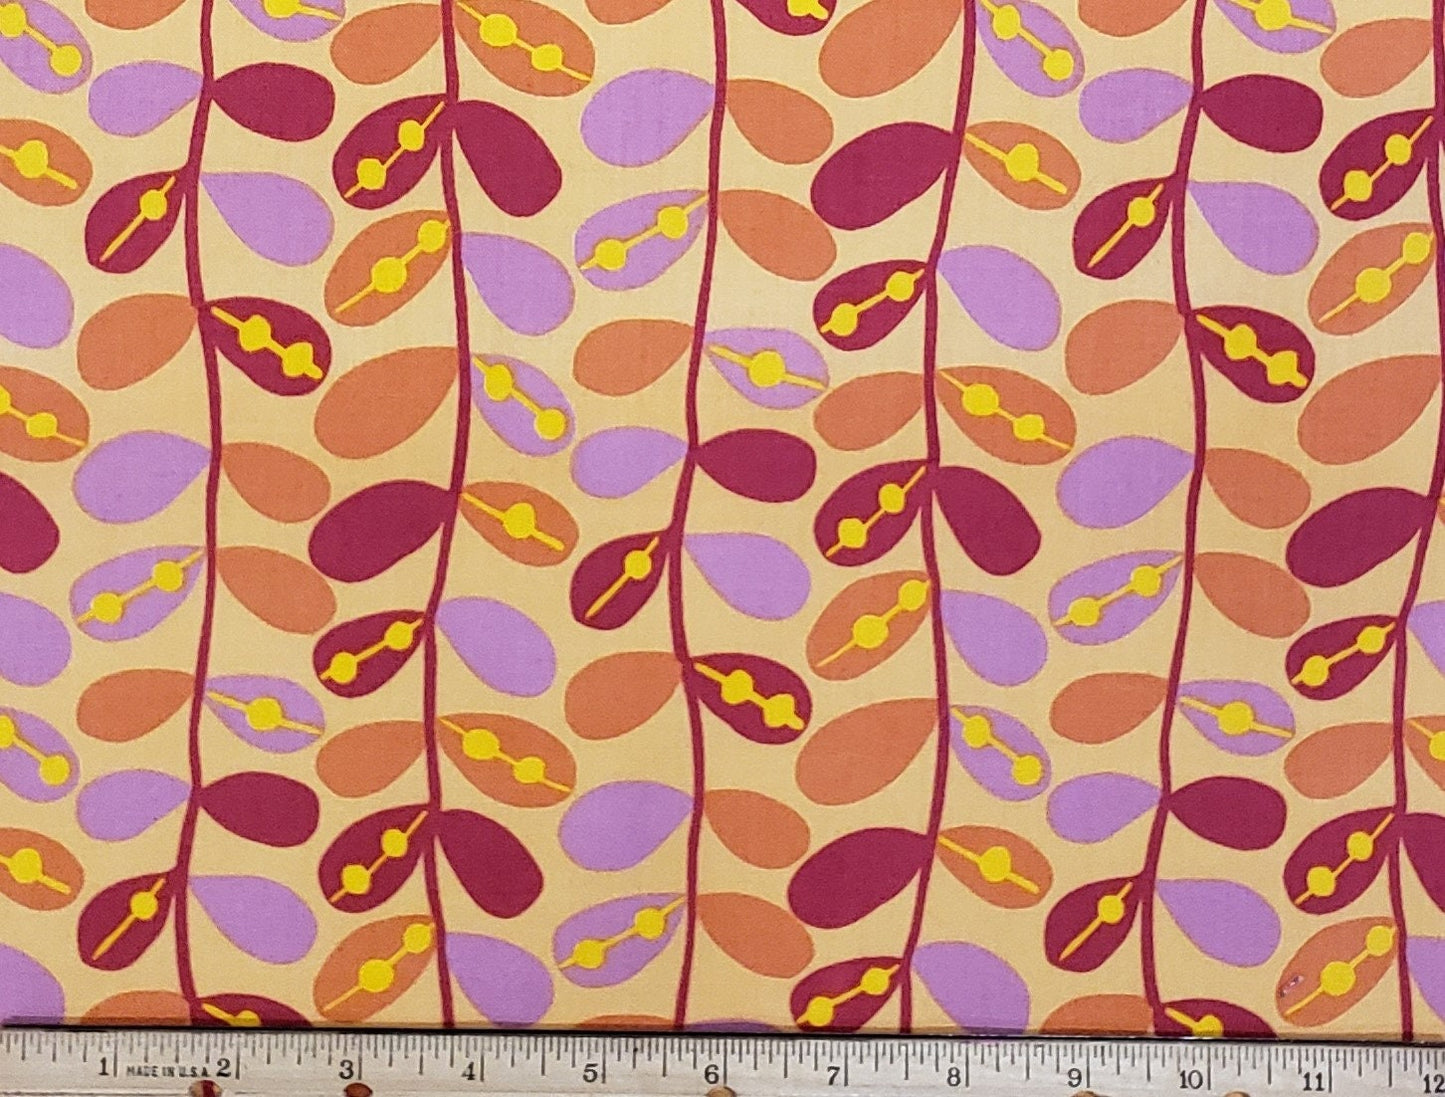 Created by Kim Schaefer for Andover Fabrics 2012 Patt 5794 - Pale Orange Fabric / Berry, Lilac and Orange Leaf Vine Pattern